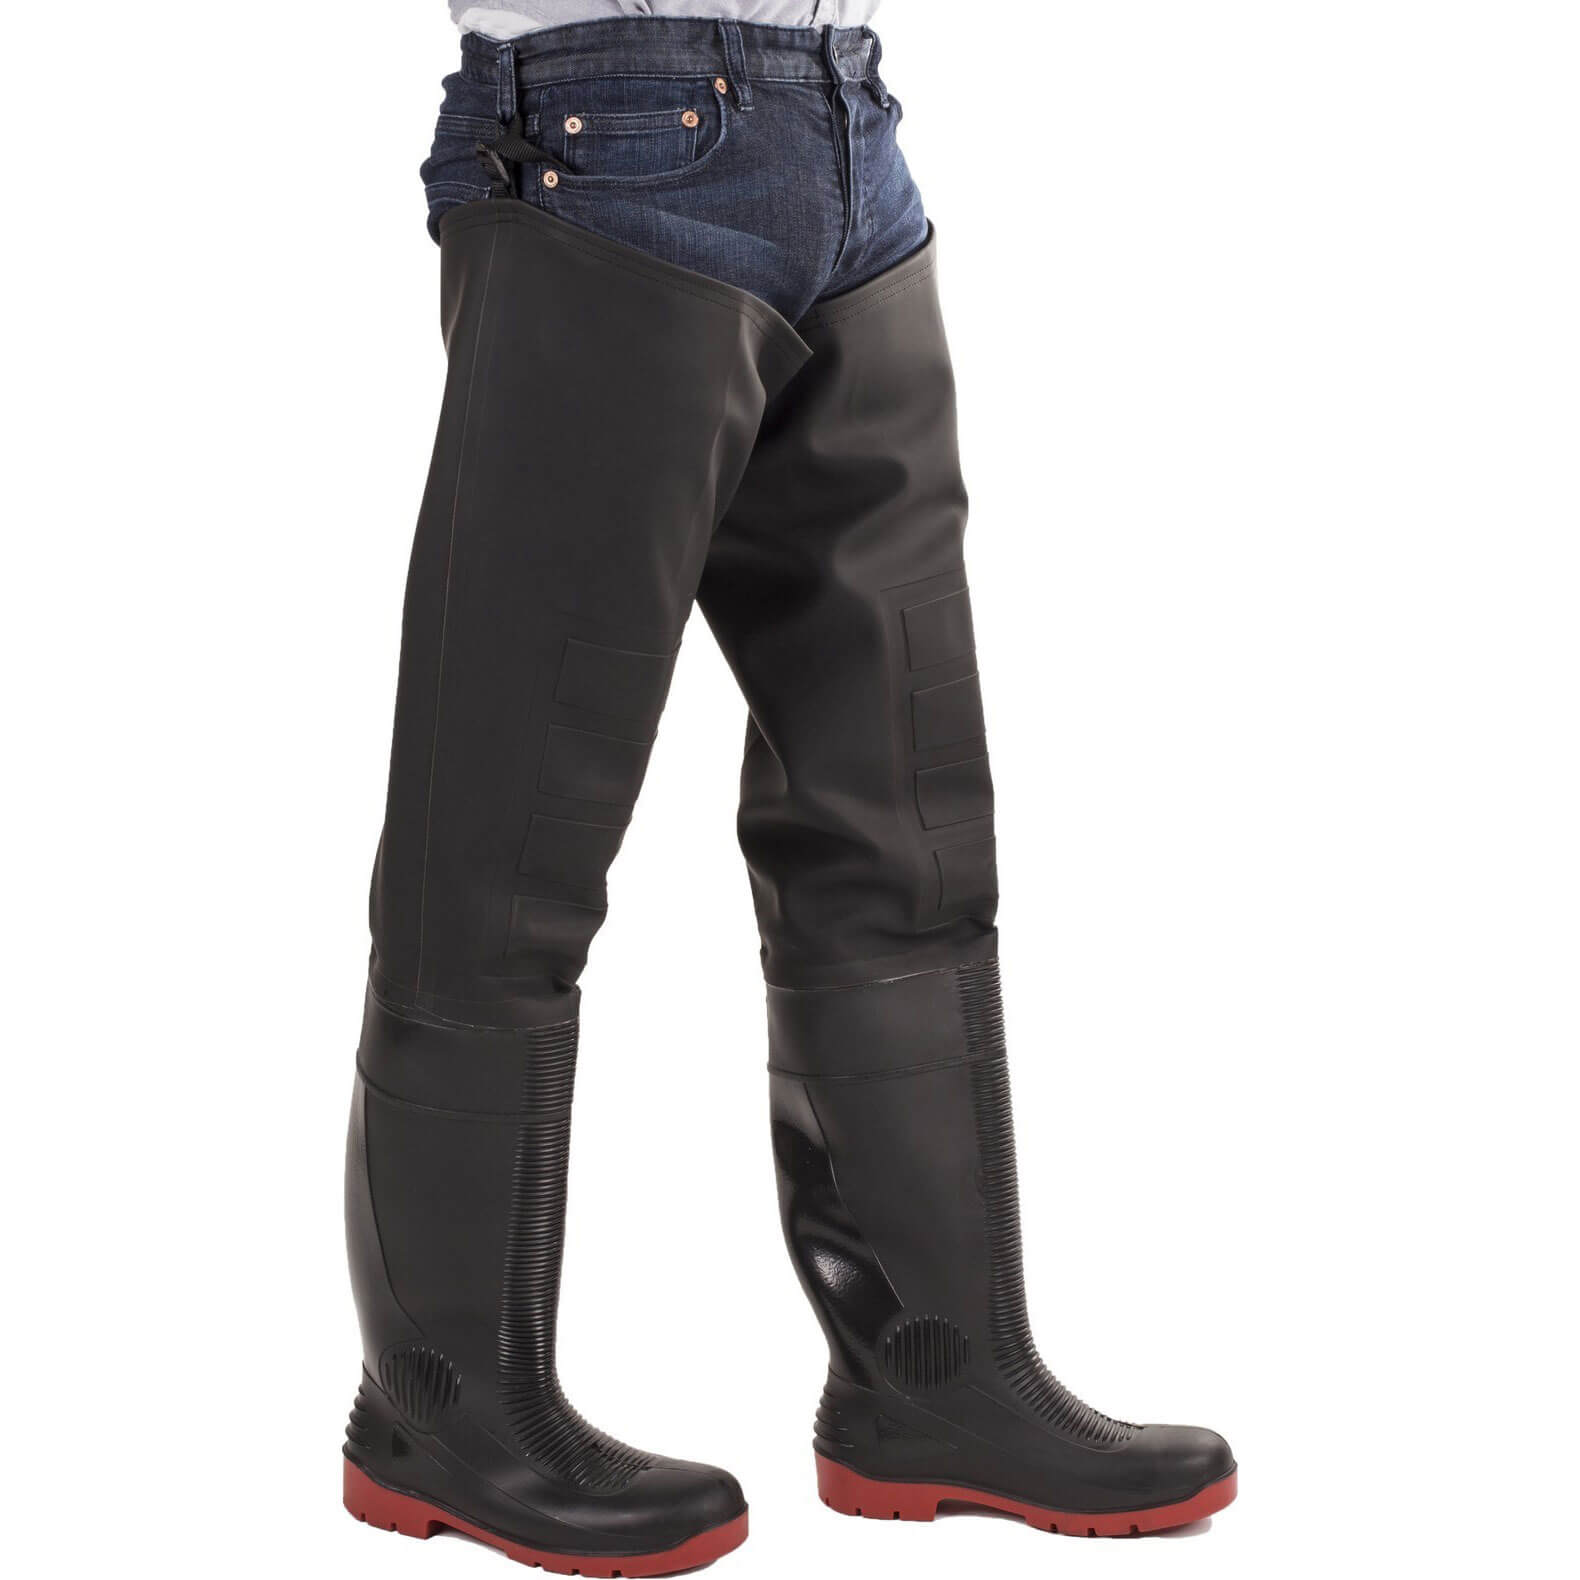 Image of Amblers Safety Rhone Thigh Safety Wader Black / Red Size 9